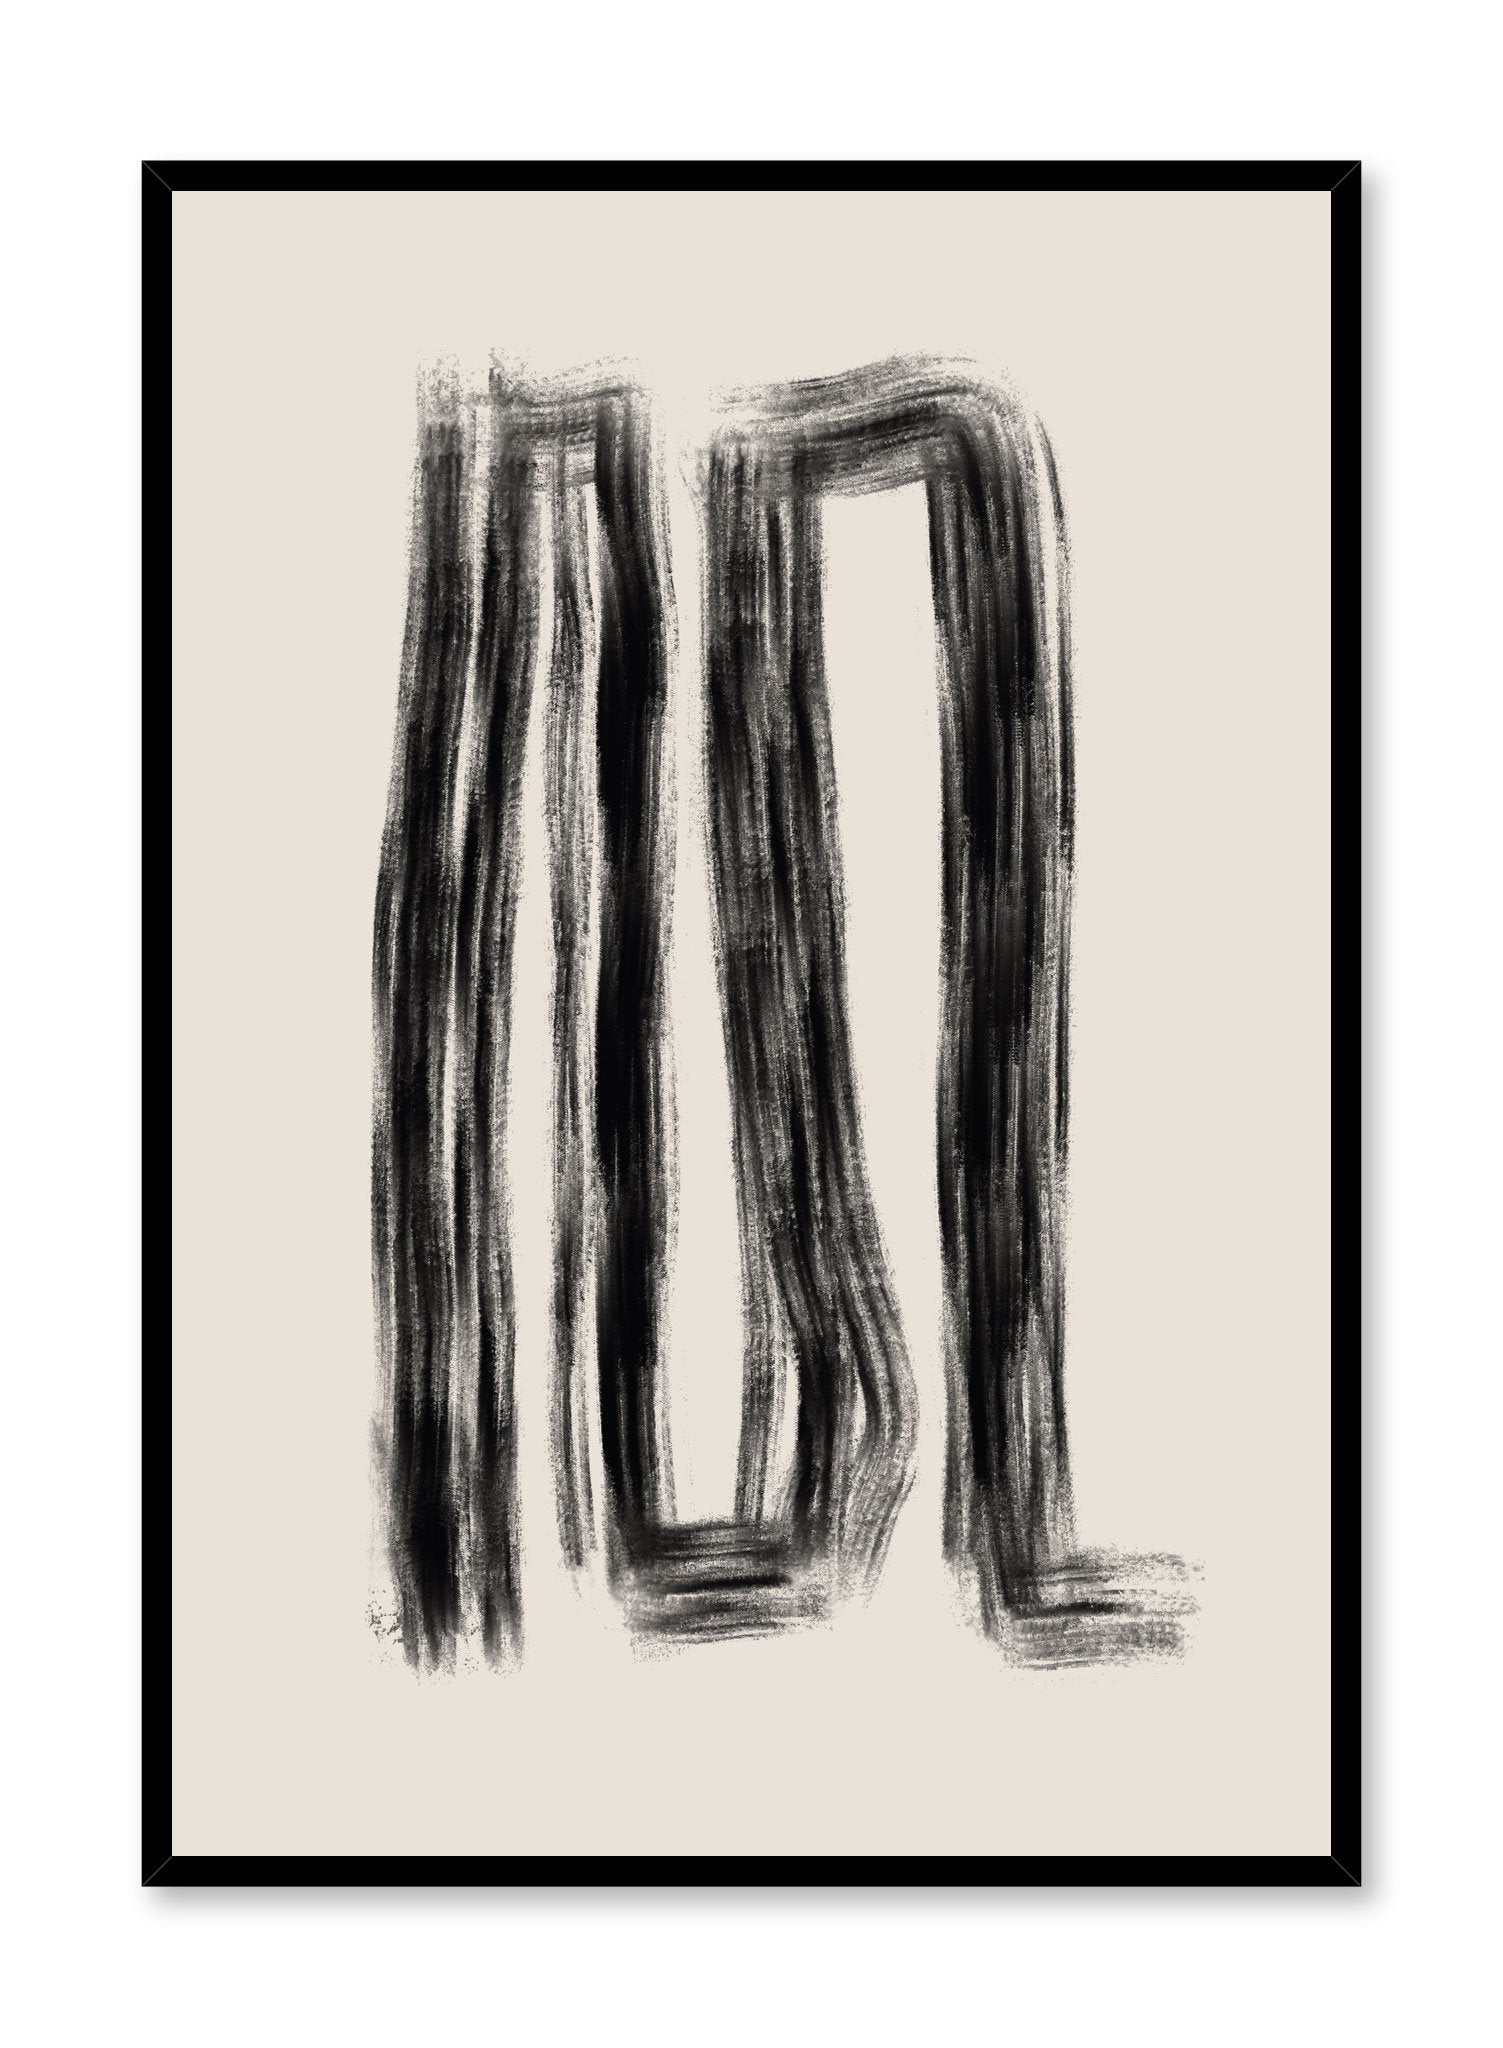 Modern minimalist poster by Opposite Wall with abstract design of Dead Ends by Toffie Affichiste